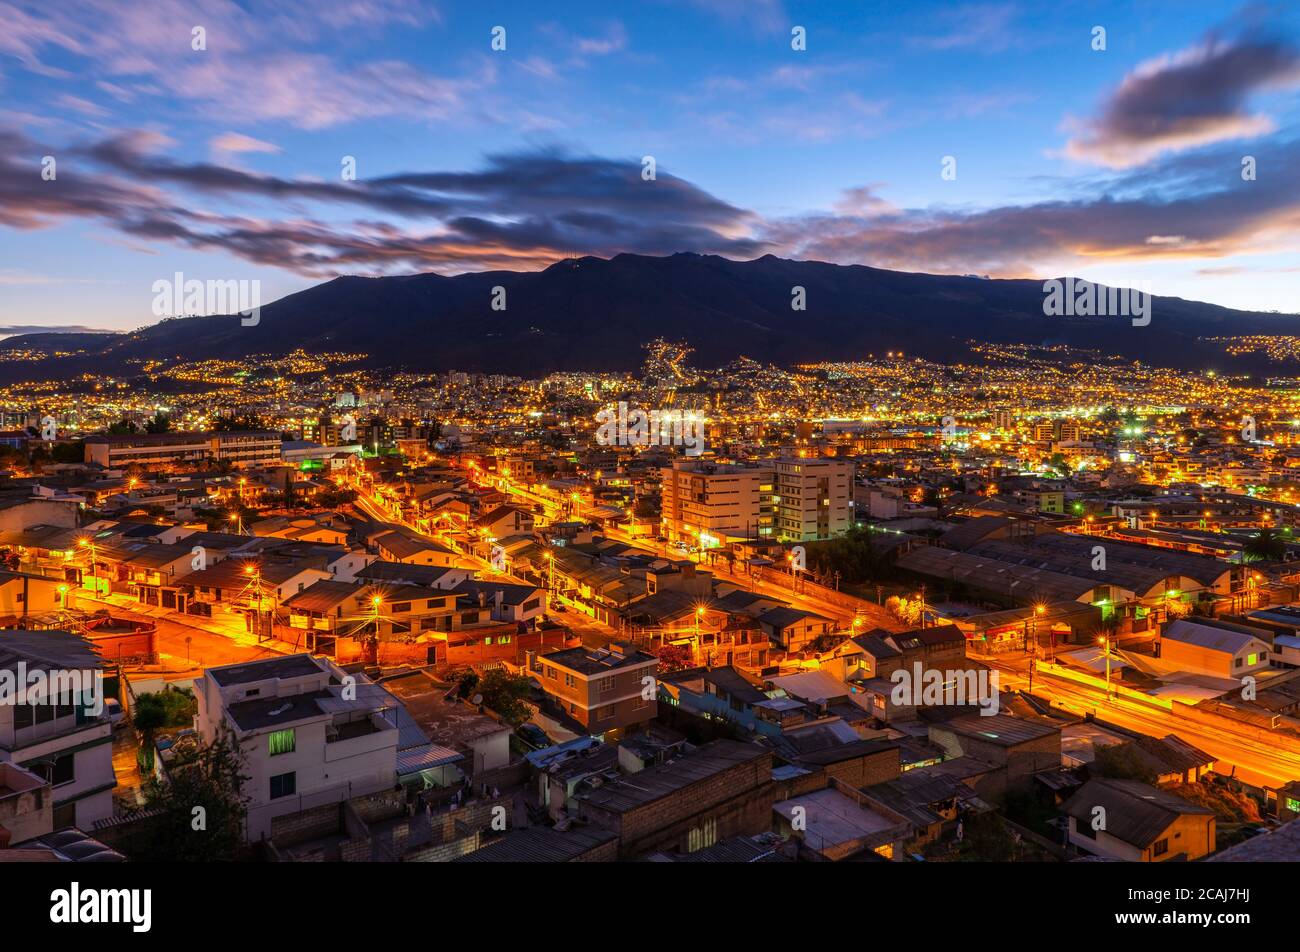 The skyline of Quito at sunset with night lights with the Pichincha volcano, Ecuador. Stock Photo